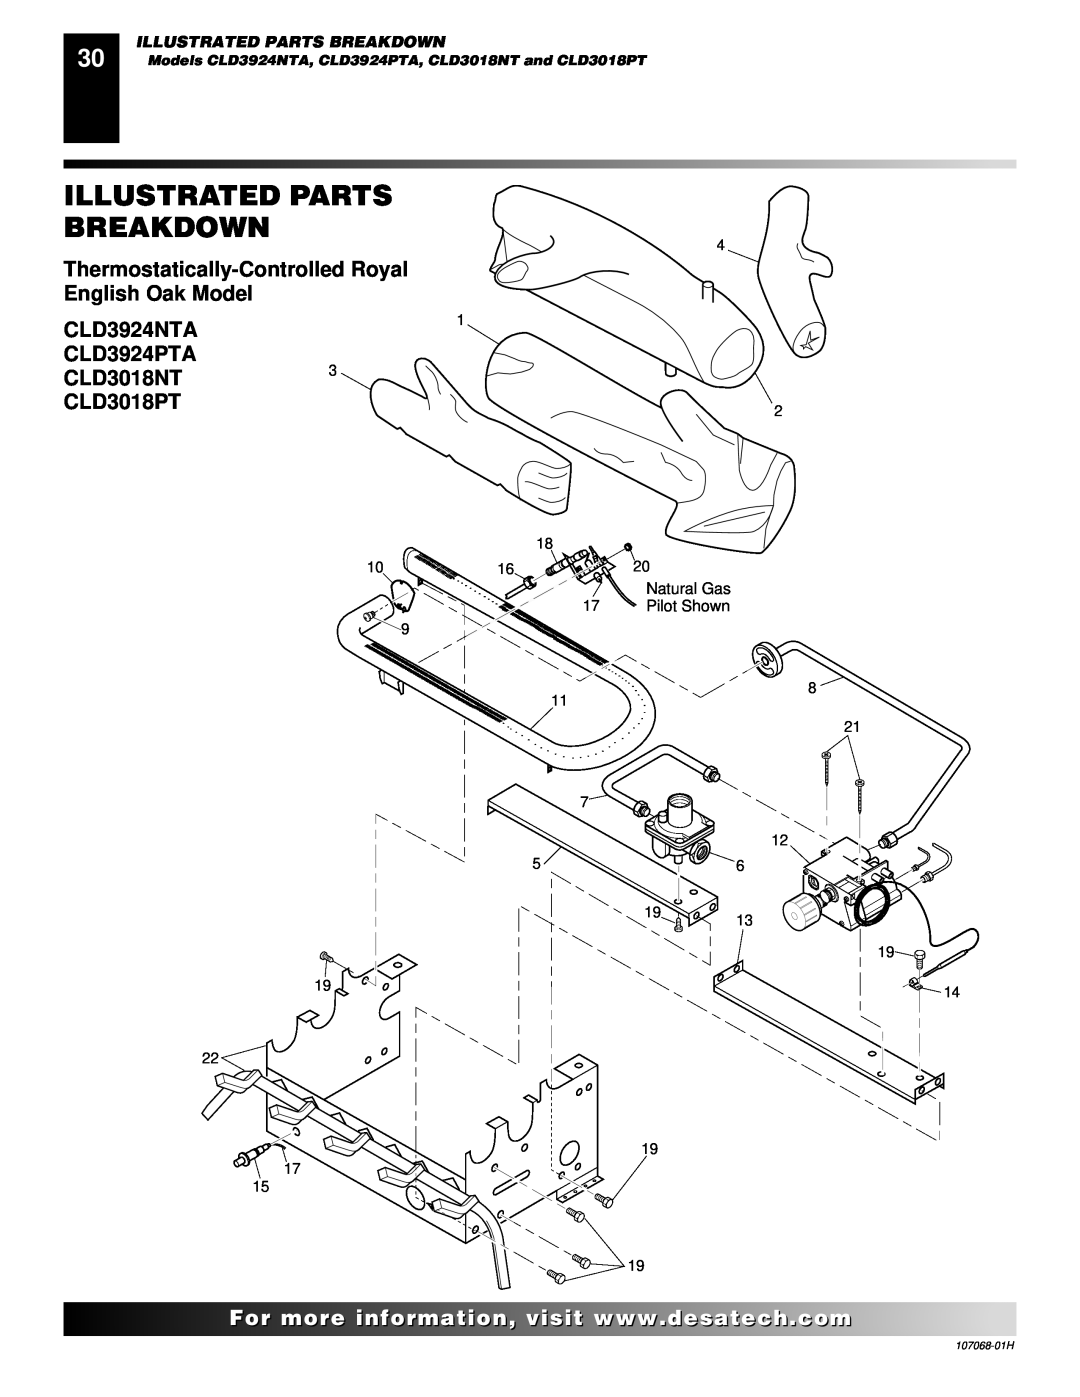 Desa SGS3124N, SGS3124P installation manual CLD3924NTA CLD3924PTA, CLD3018NT3 CLD3018PT, Illustrated Parts Breakdown 